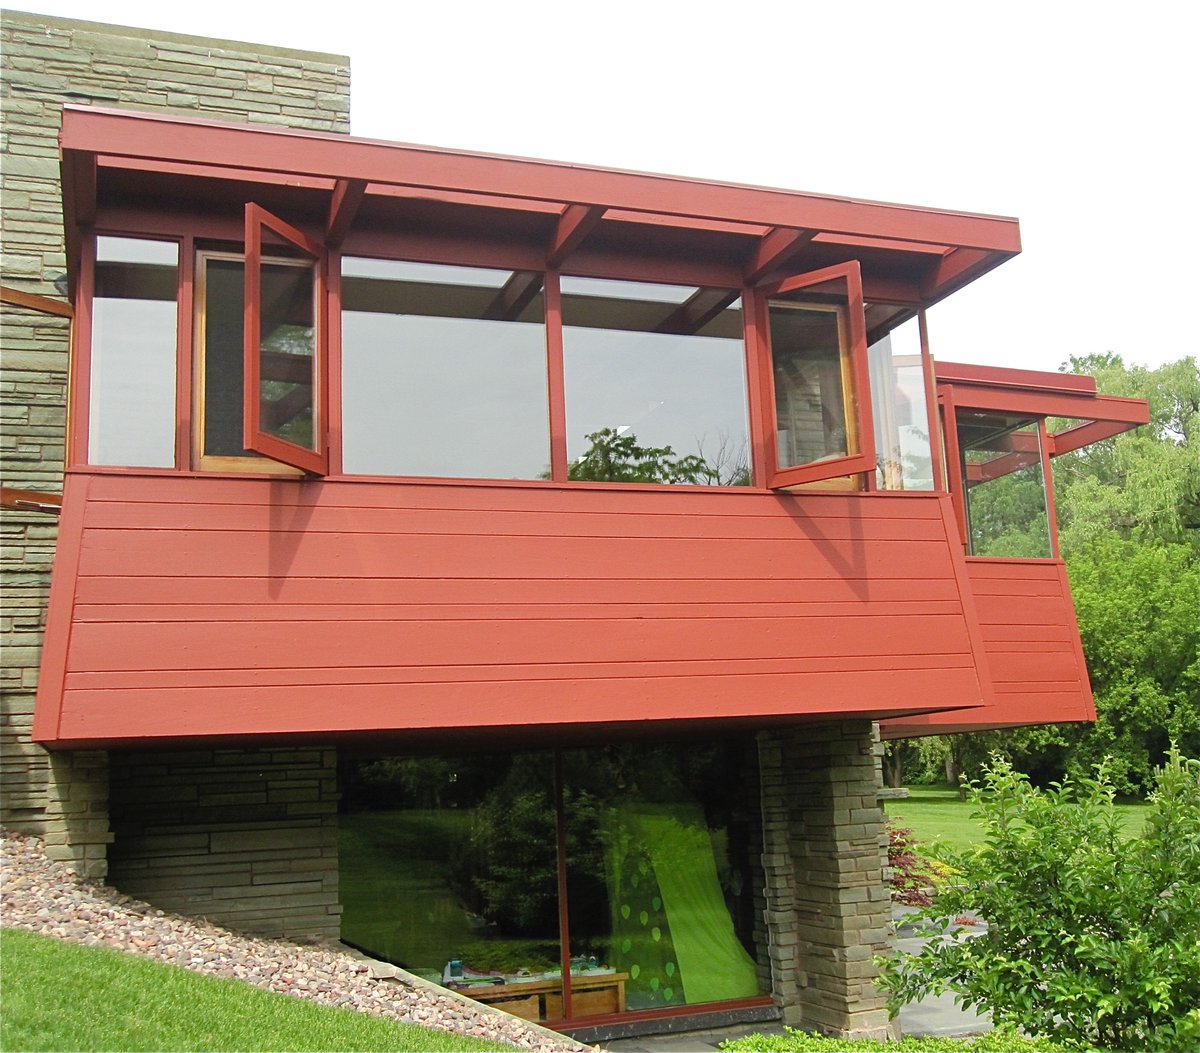 The Richard J. Christensen House (1954) in Racine, Wisconsin is known as "The Riverhome" or "Ogawa-uchi". The architect, John Randal McDonald, was sometimes known as "the poor man's Frank Lloyd Wright" but I'd take it as a compliment. Amazing to think this home is 66 yrs old!